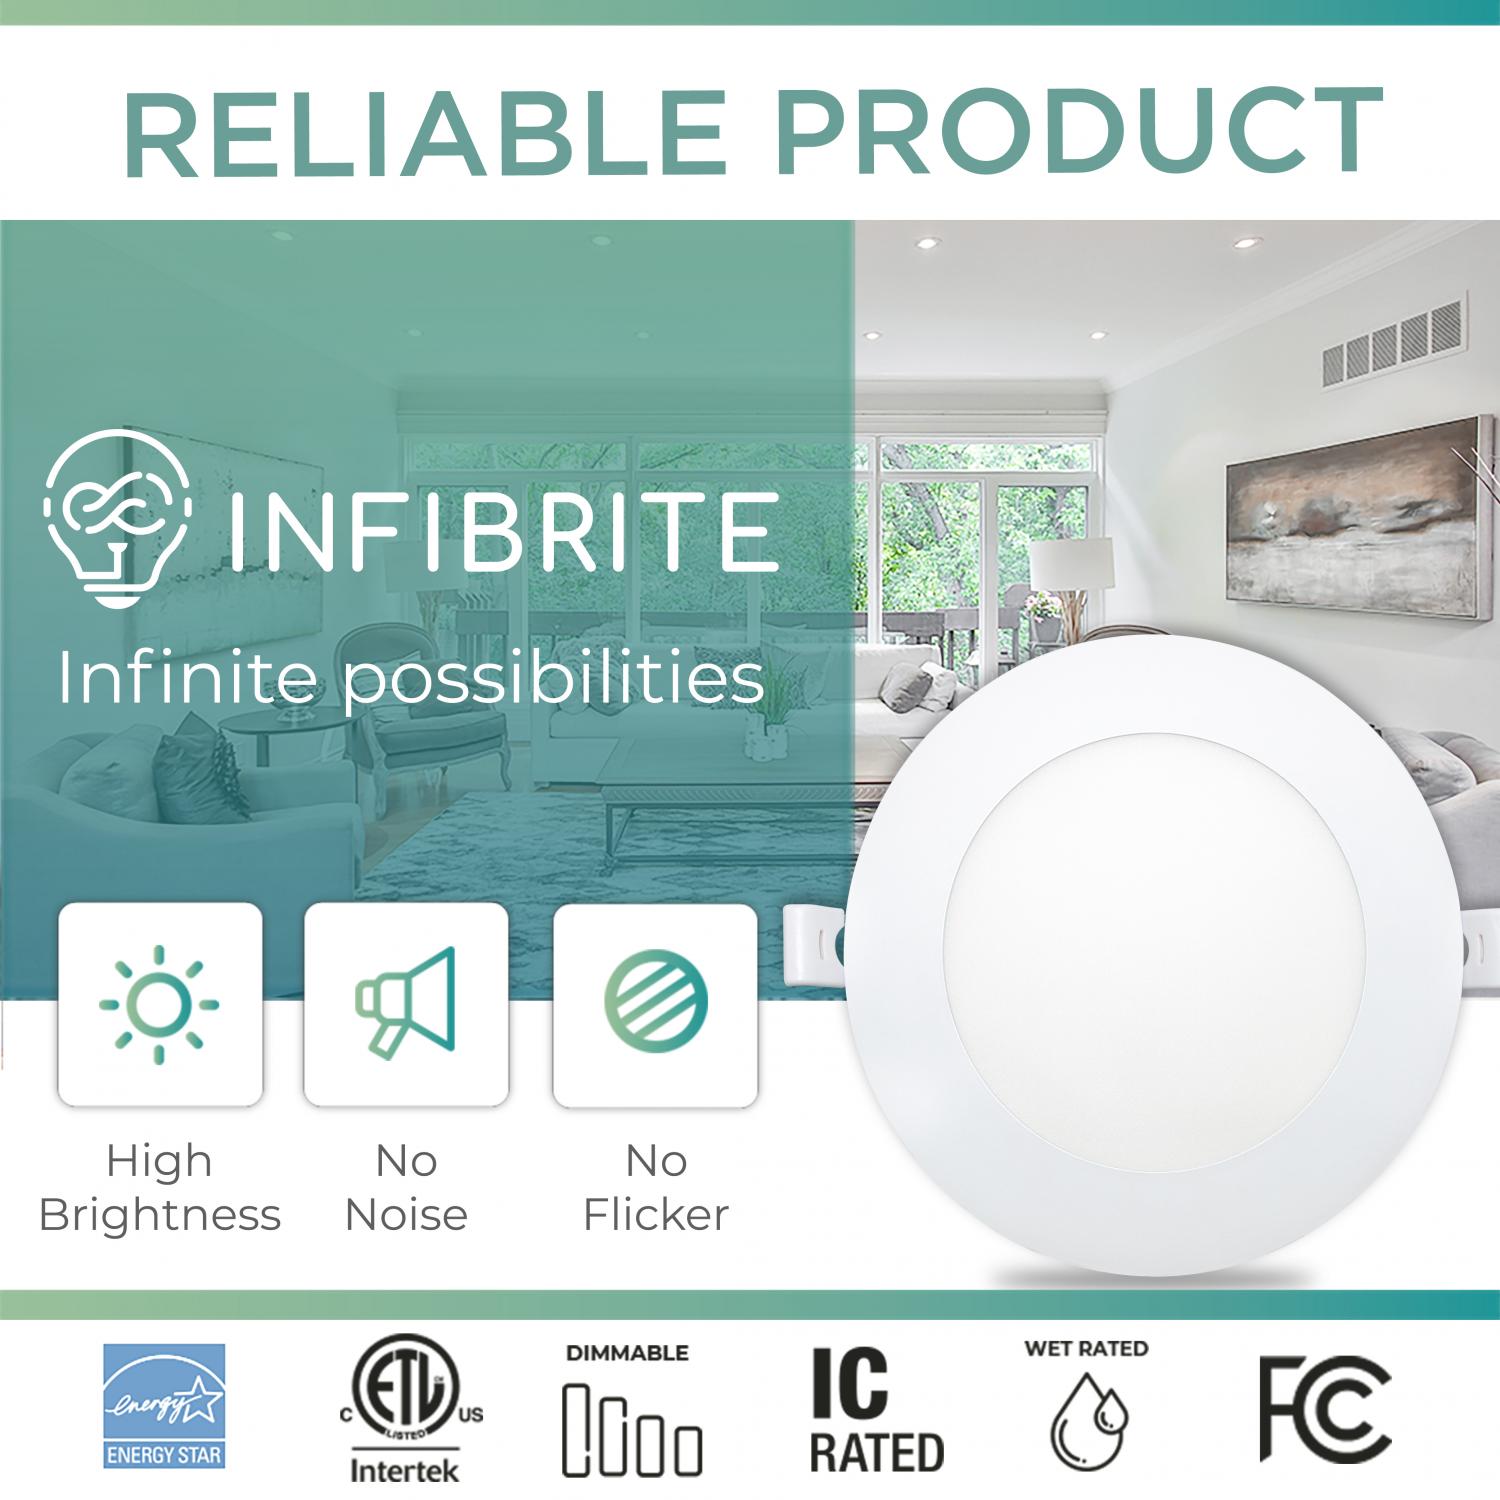 Infibrite 4 Inch 3000K/4000K/5000K Selectable 9W 750 LM Ultra-Slim LED Ceiling Light with Junction Box, Flush Mount, Dimmable, Fixture for Bedroom, Wet Rated for Bathroom, Easy Install, 75W Eqv, ETL & Energy Star, US Company